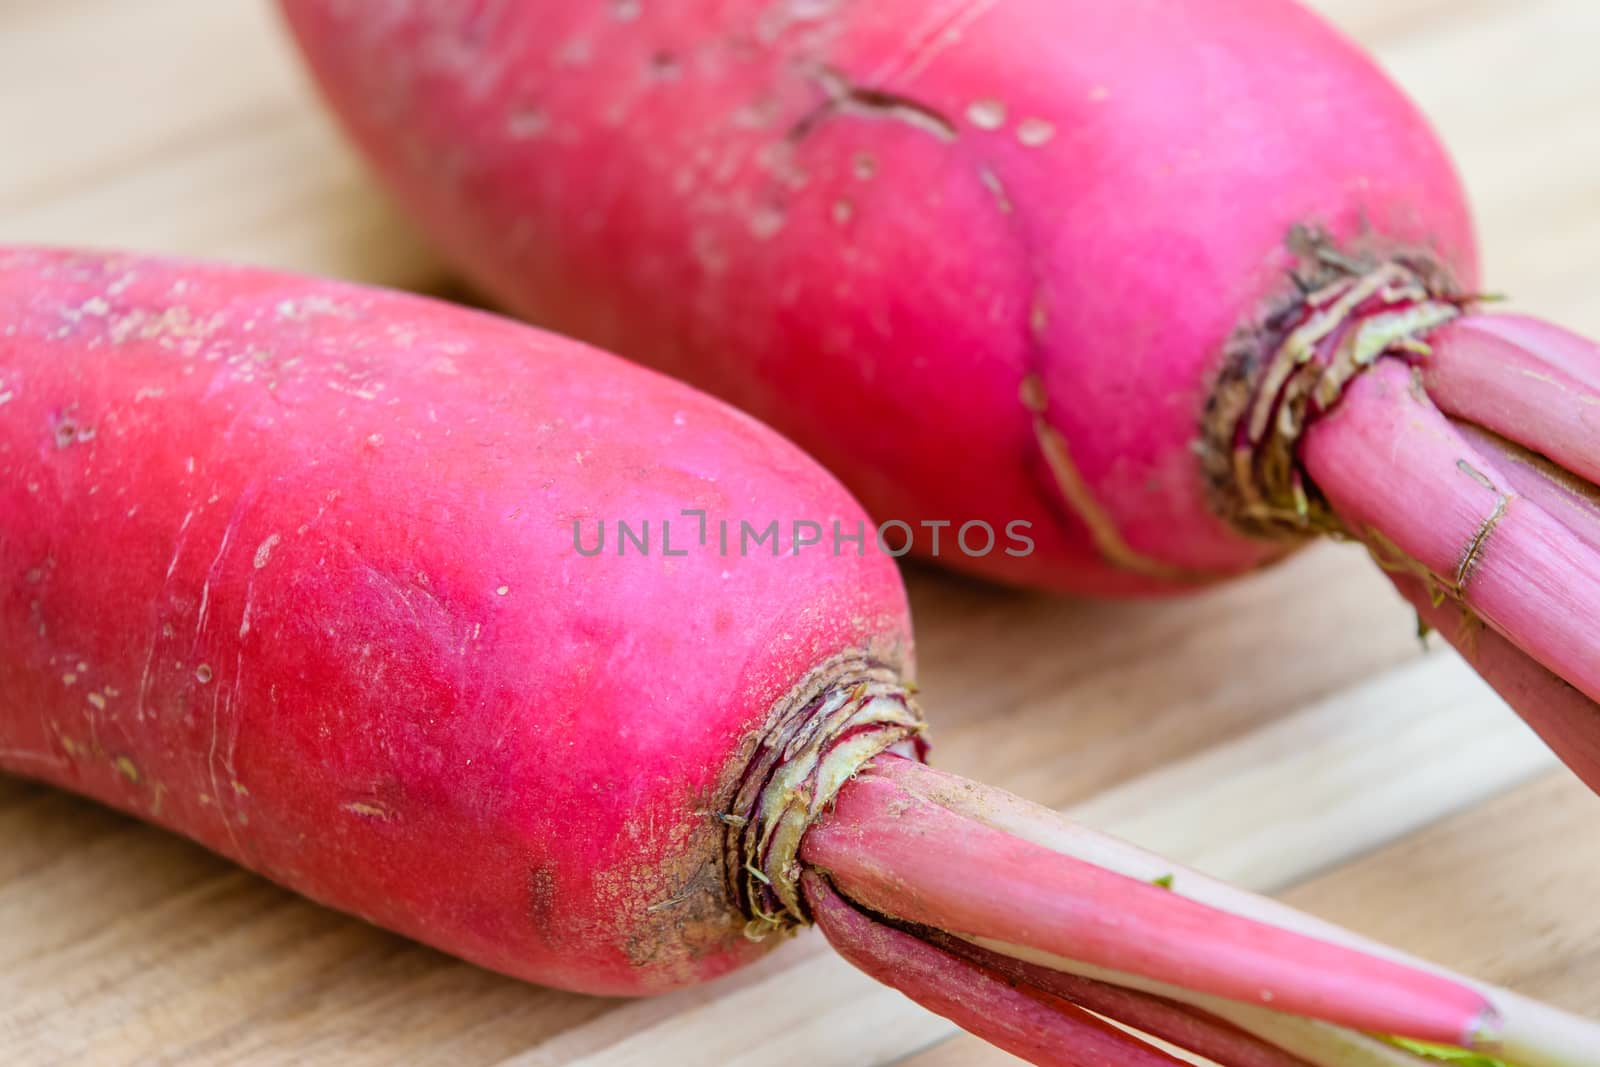 Red radish on wooden table by naramit